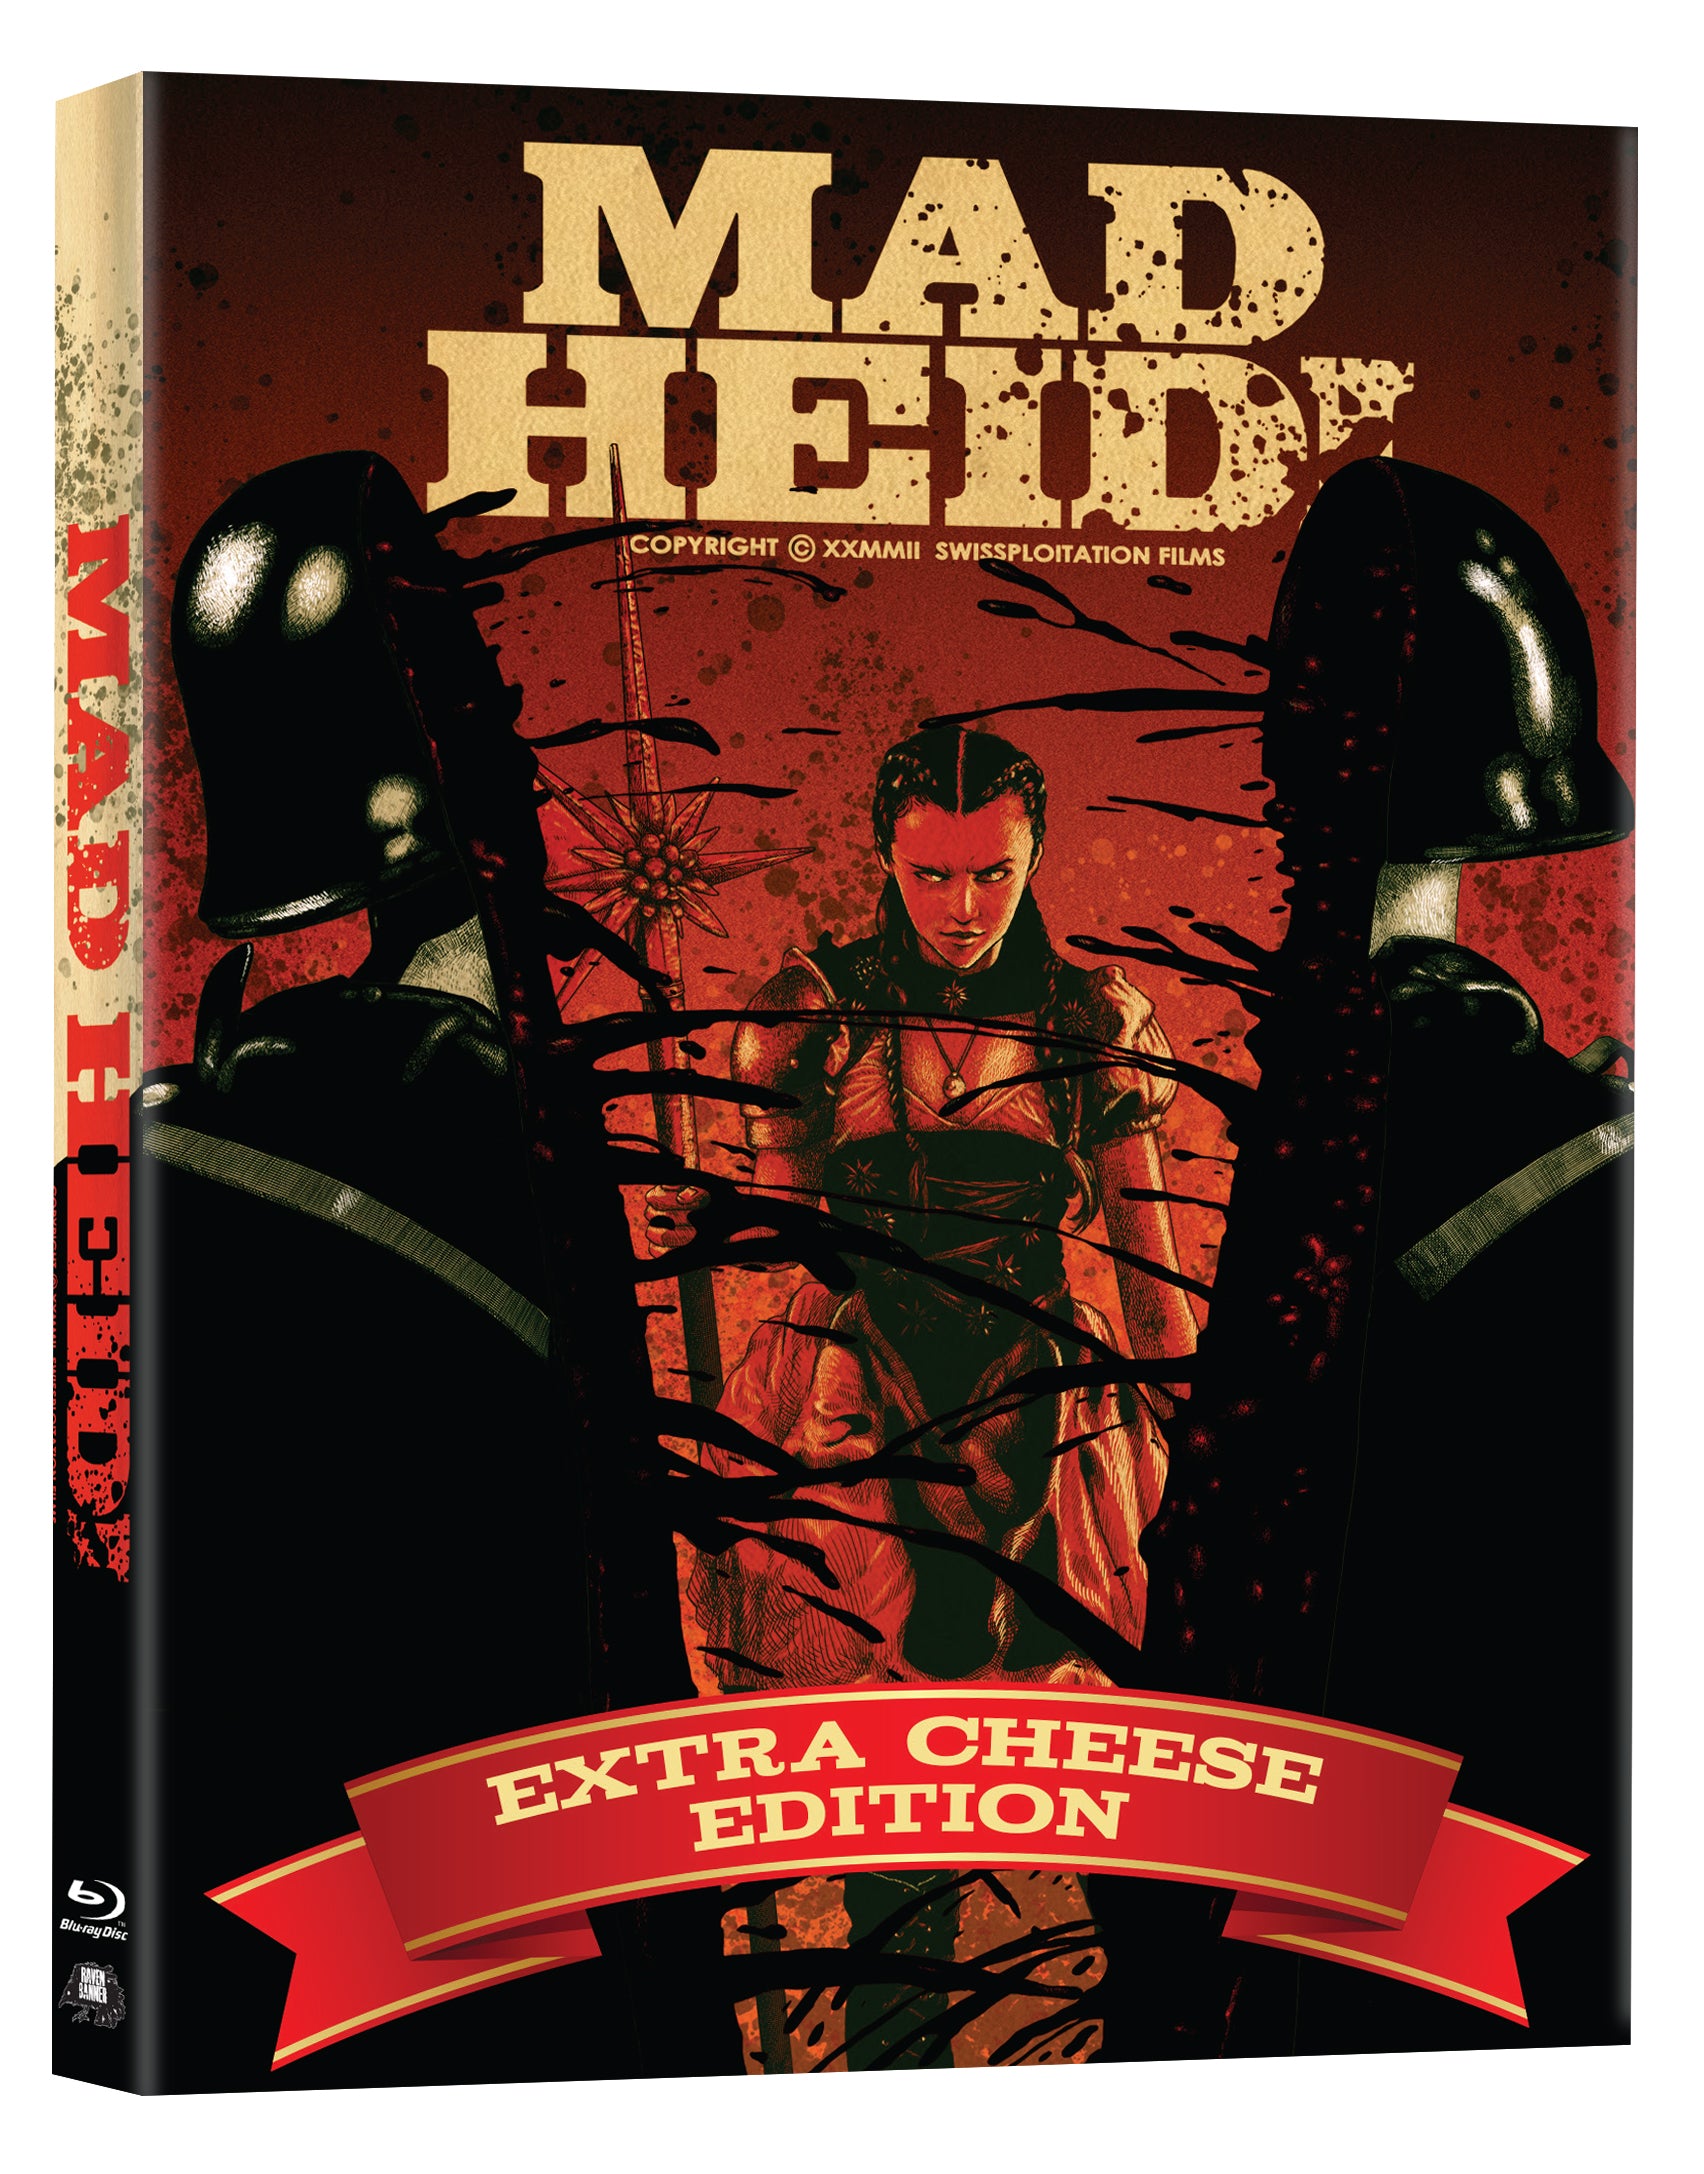 MAD HEIDI - EXTRA CHEESE LIMITED EDITION BLU-RAY & CD w/ TRADING CARDS